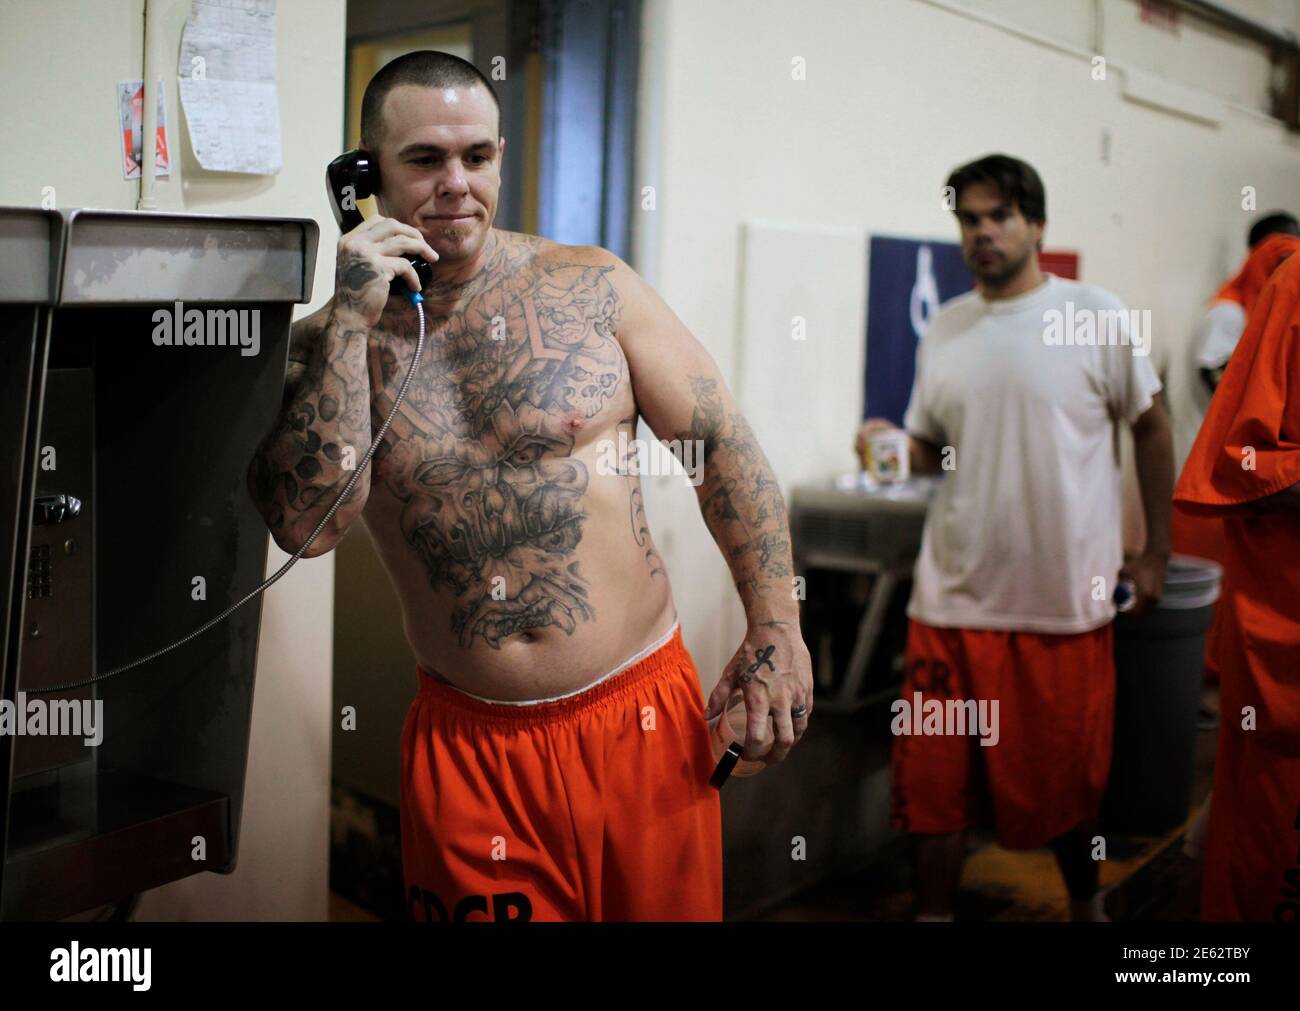 An inmate talks on the phone in a gymnasium where he is housed due to overcrowding at the California Institution for Men state prison in Chino, California, June 3, 2011. The Supreme Court has ordered California to release more than 30,000 inmates over the next two years or take other steps to ease overcrowding in its prisons to prevent 'needless suffering and death.' California's 33 adult prisons were designed to hold about 80,000 inmates and now have about 145,000. The U.S. has more than 2 million people in state and local prisons. It has long had the highest incarceration rate in the world.  Stock Photo